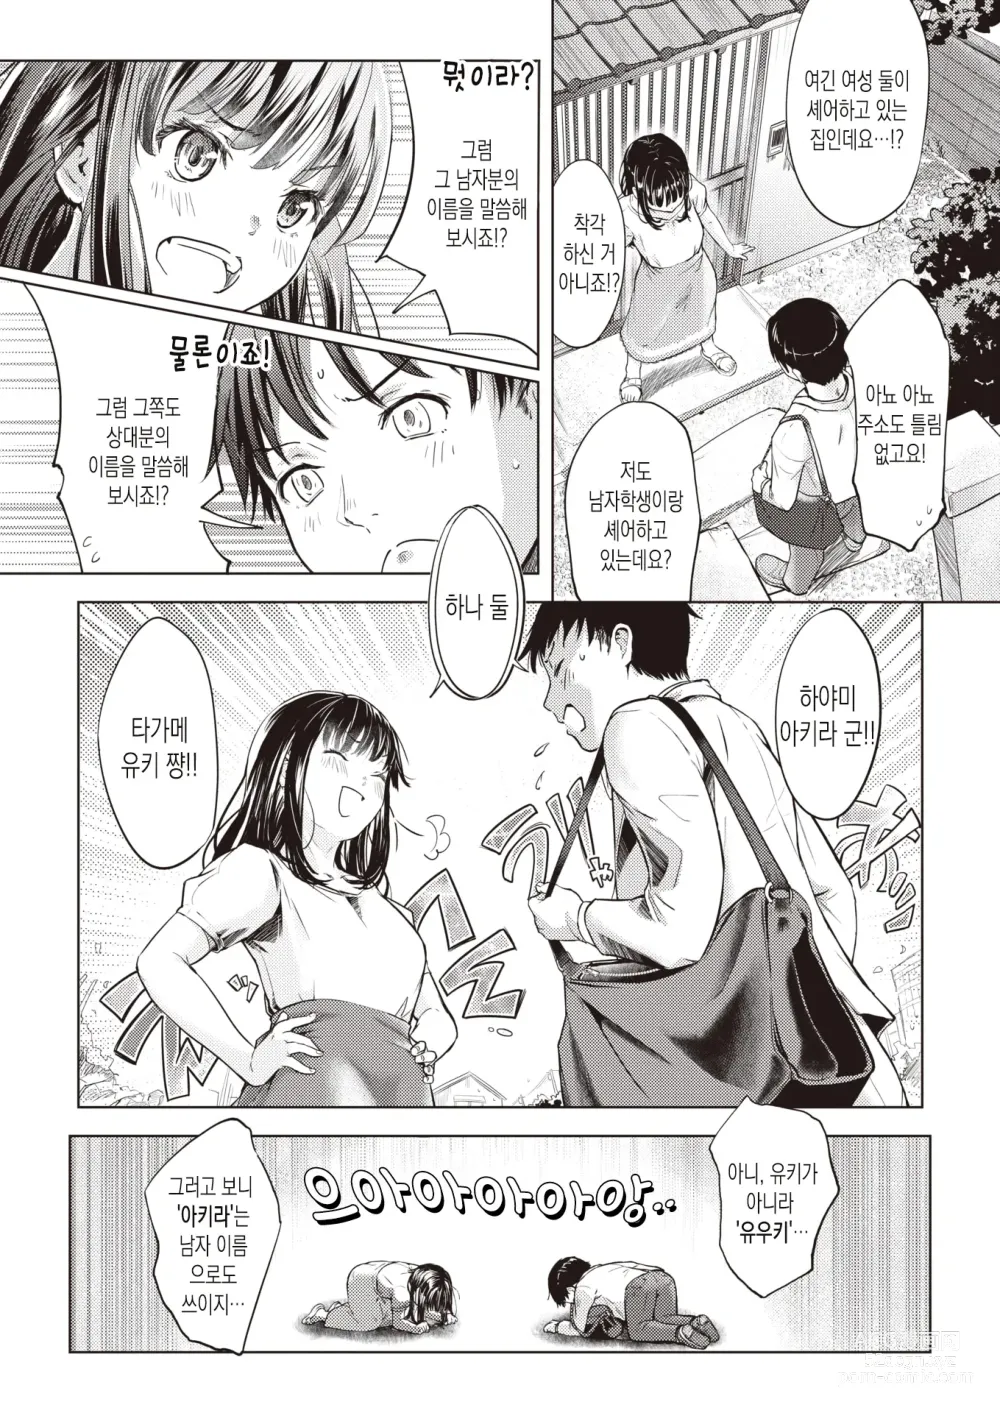 Page 3 of manga 착각누님Connect